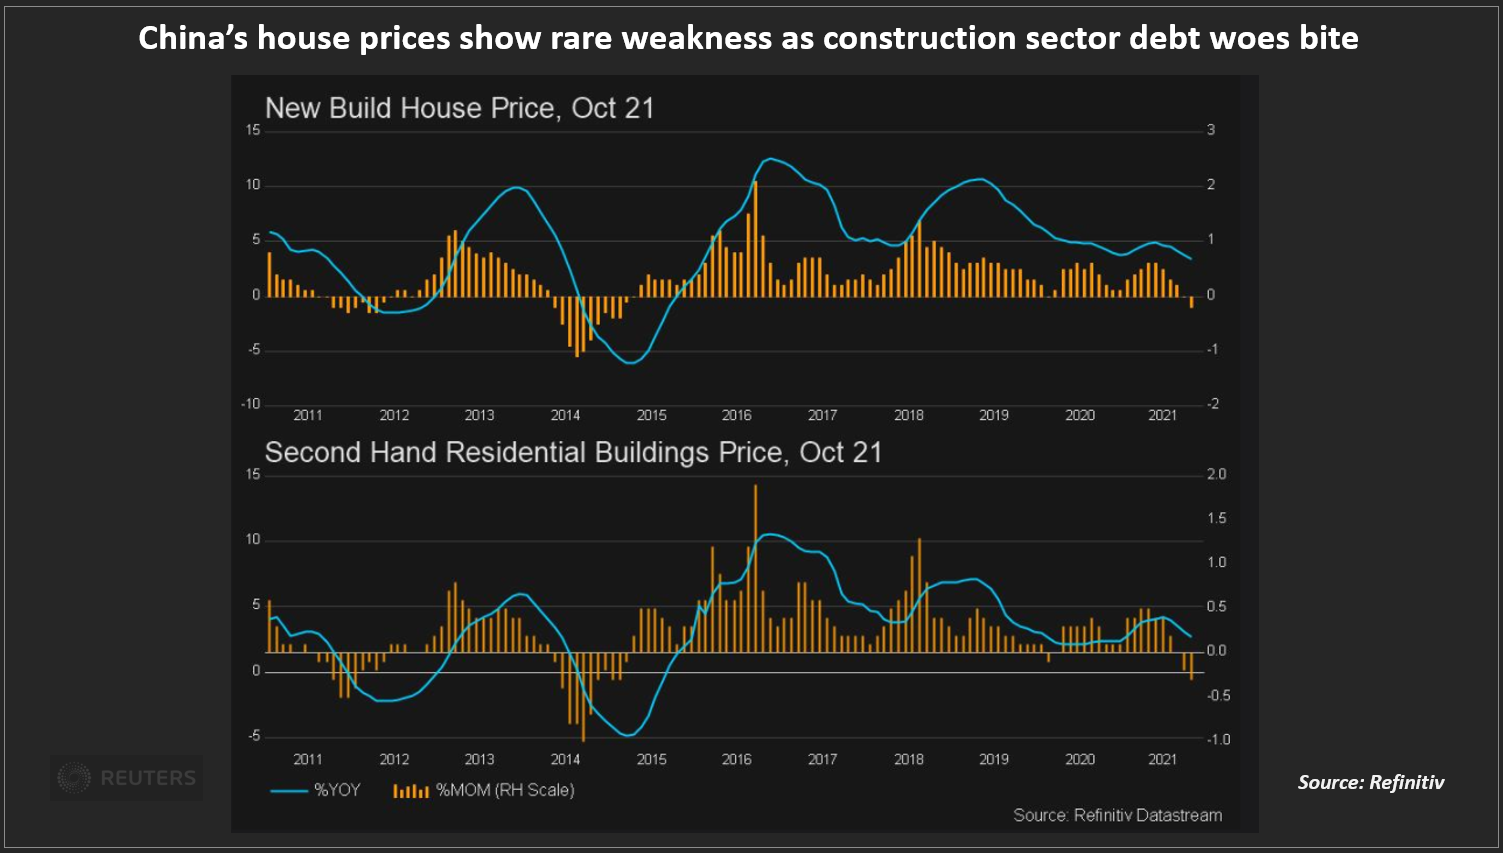 China property prices show rare weakness as construction industry debt problems bite